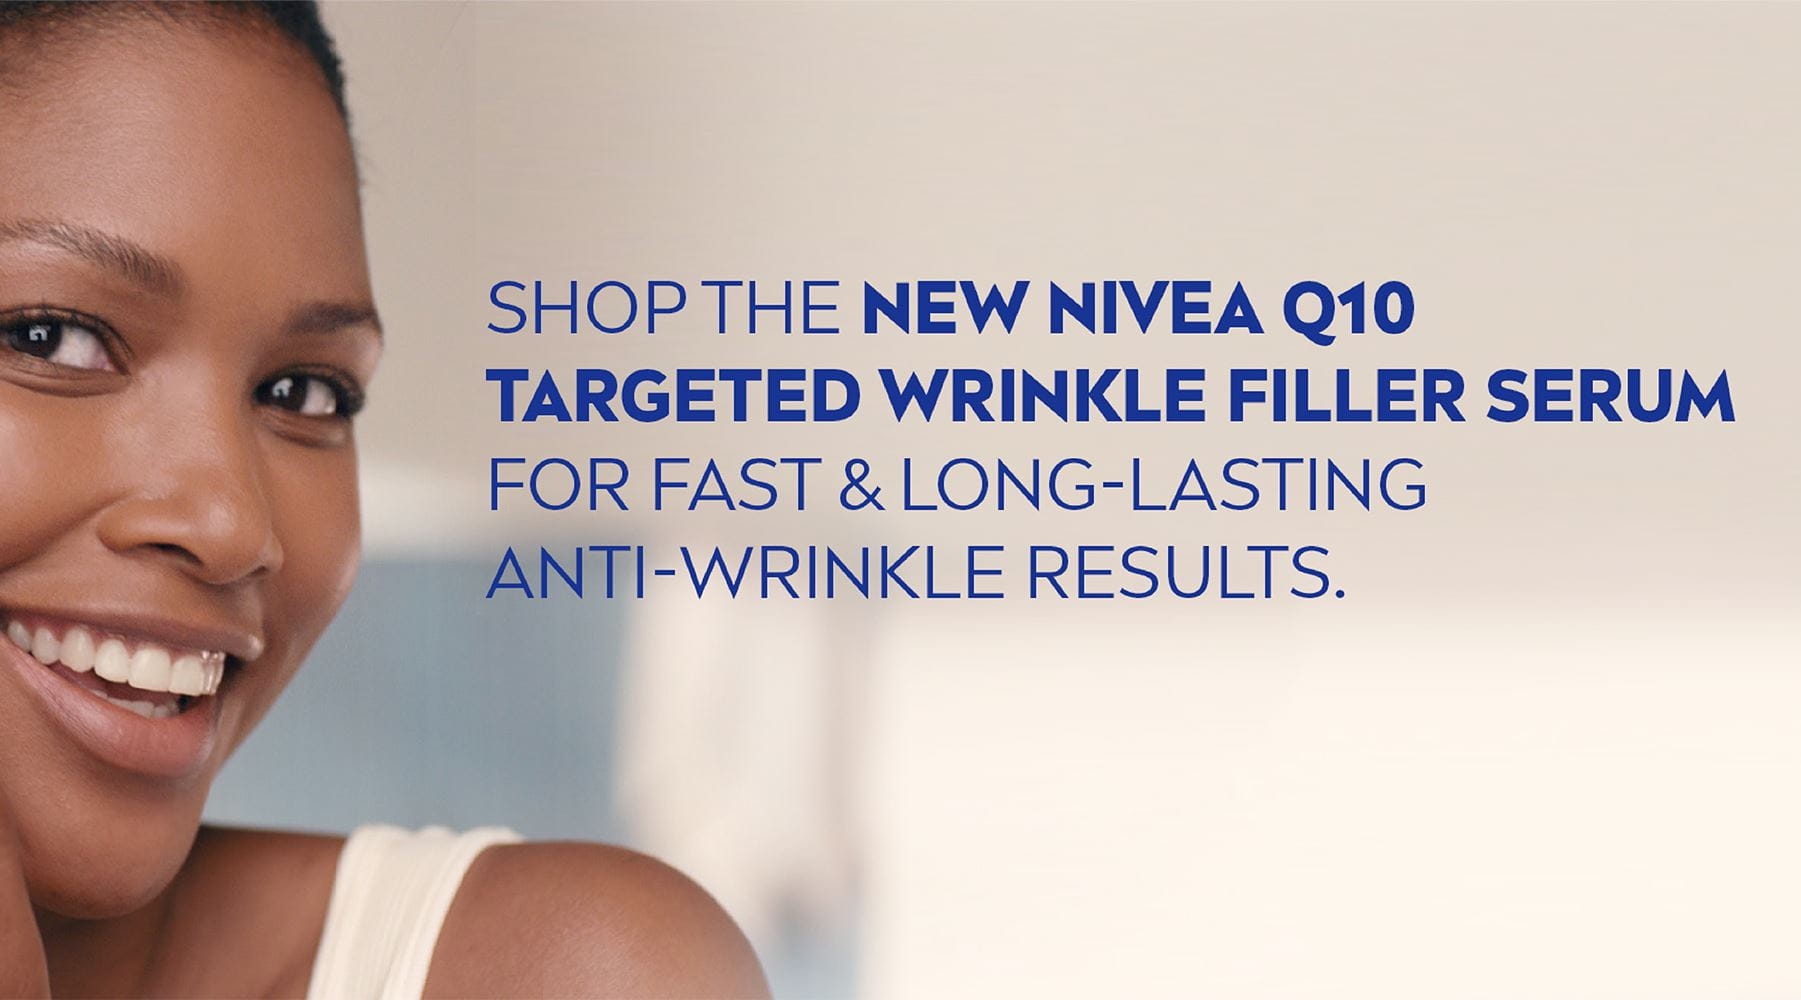 Shop the NEW NIVEA Q10 Targeted Wrinkle Filler Serum for fast & long-lasting anti-wrinkle results. 